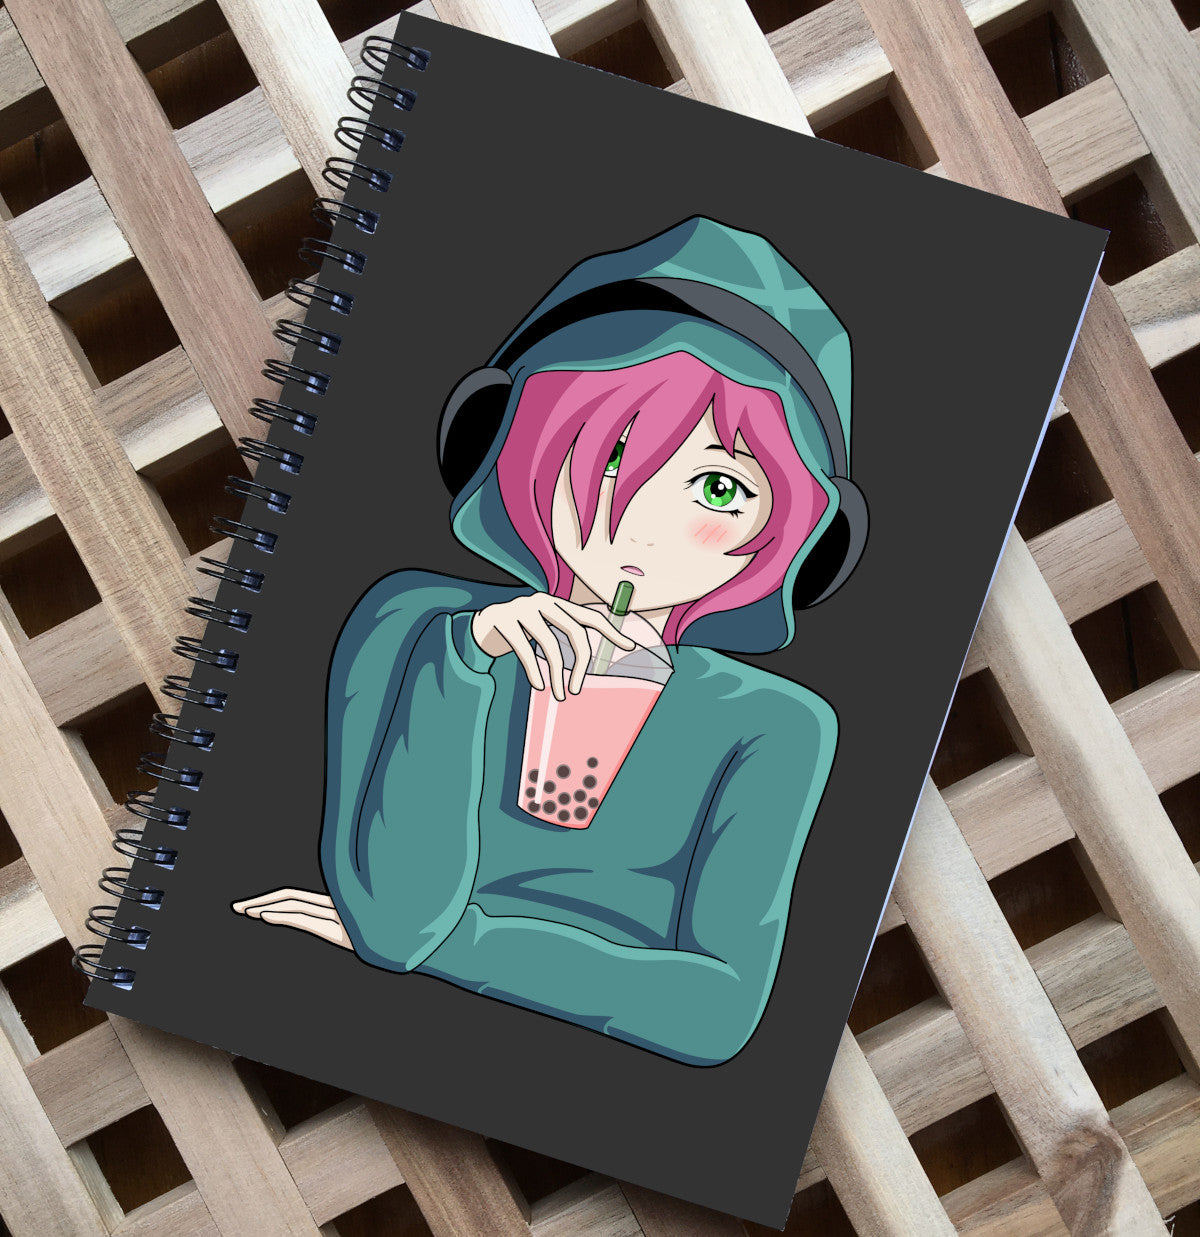 Spiral notebook lying flat on a wooden surface, has a dark grey front over featuring an anime girl wearing a green hoodie with the hood up and black headphones over the top, she has green eyes and pink hair and is holding a transparent plastic cup of pink boba with a green straw in her right hand which has her elbow resting on a surface, her left arm and hand is lying flat across her body in front of her on the surface as if she is sitting at a table